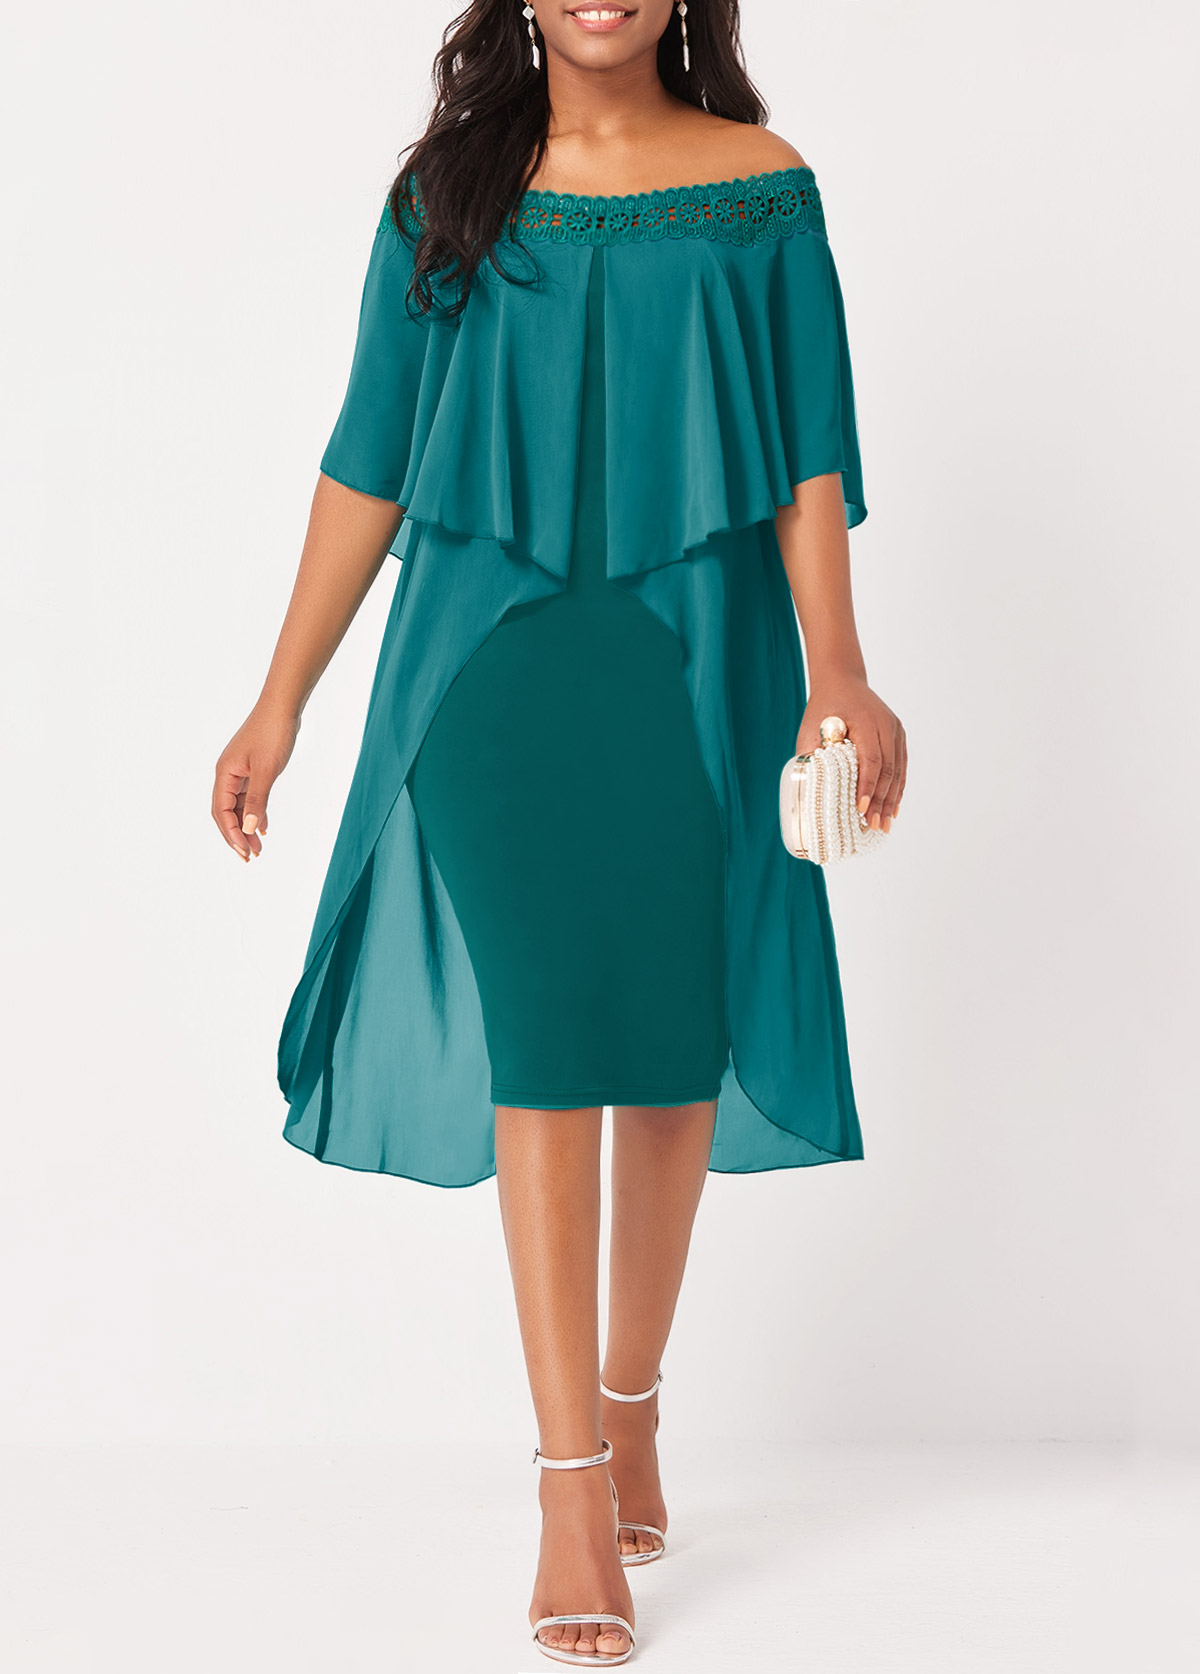 Off Shoulder Lace Stitching Turquoise Flounce Dress